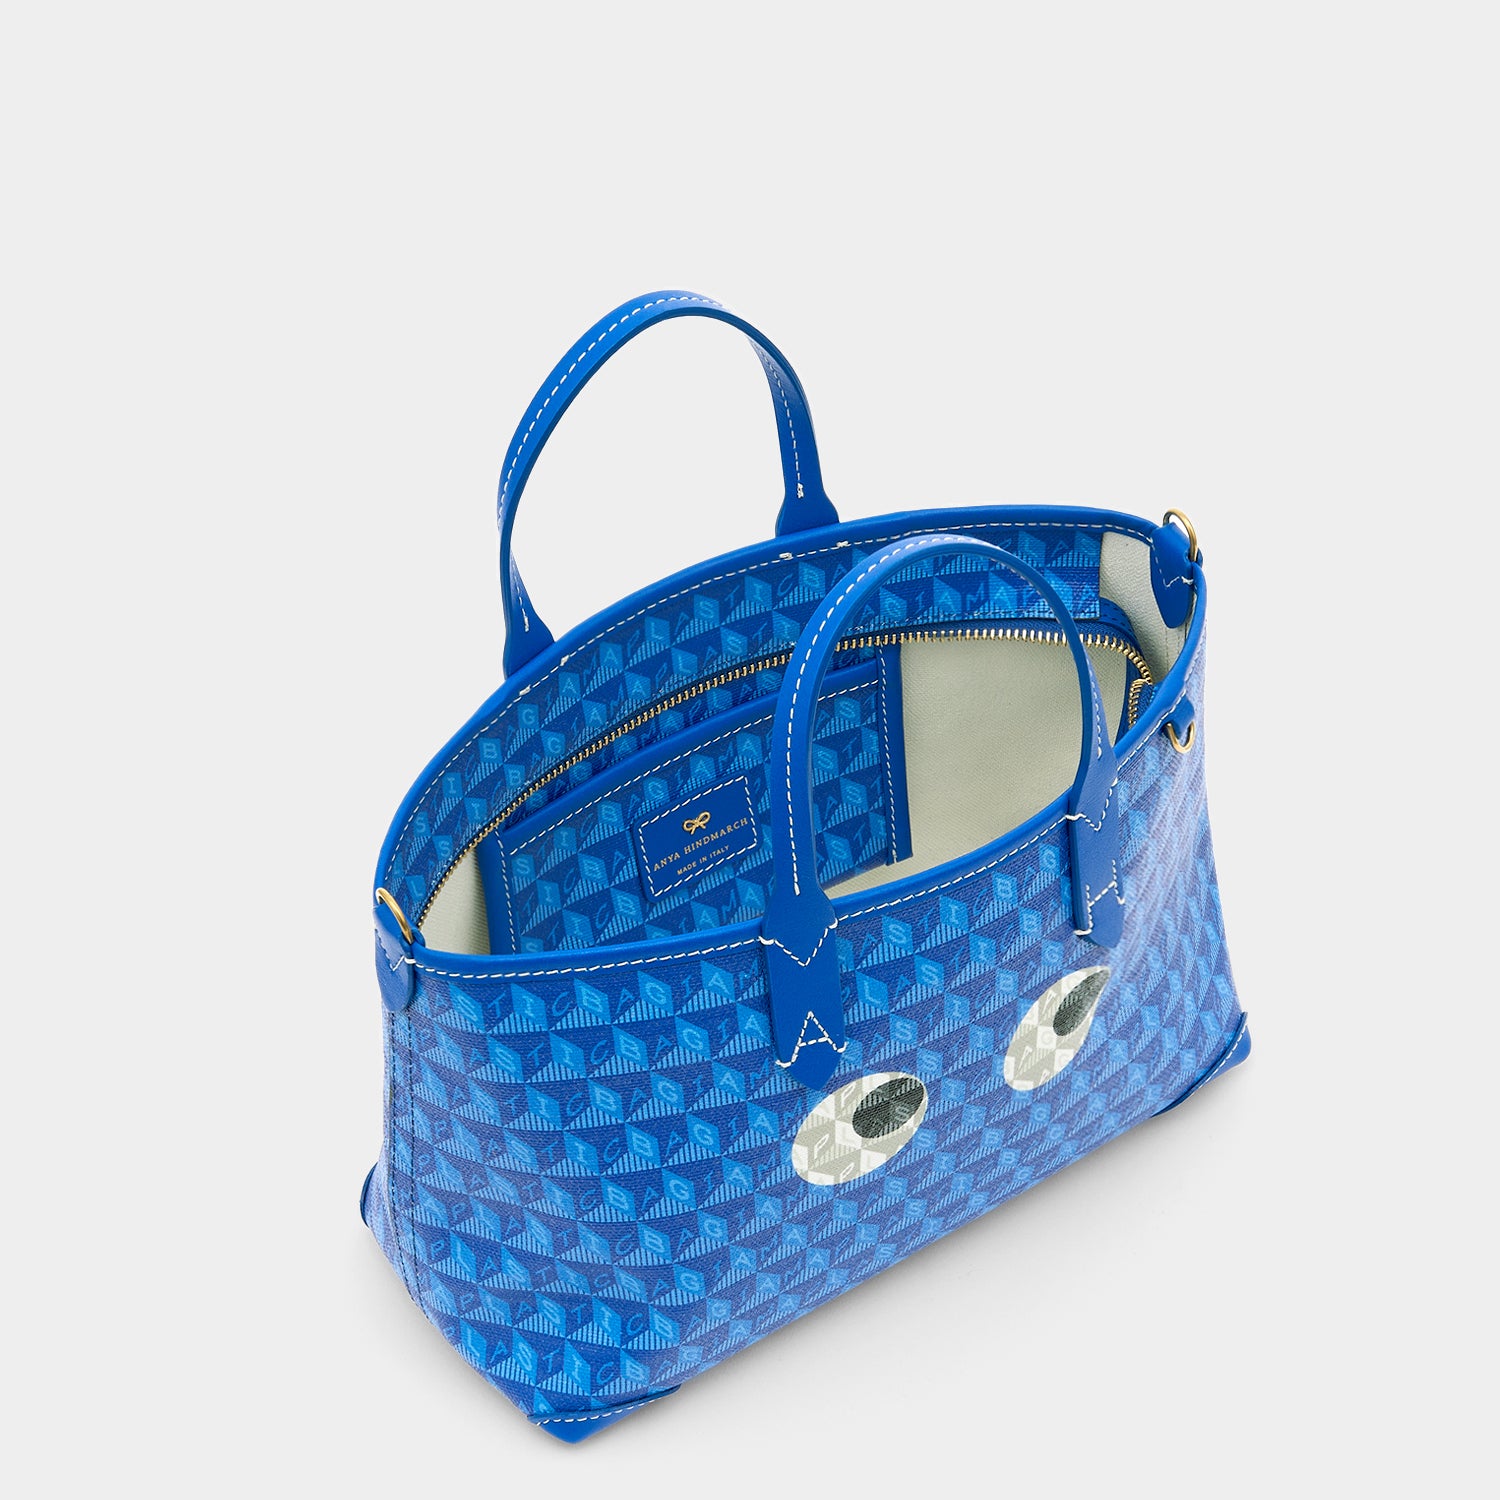 「I AM A Plastic Bag」 XS アイズ トート -

                  
                    Recycled Coated Canvas in Electric Blue -
                  

                  Anya Hindmarch JP
